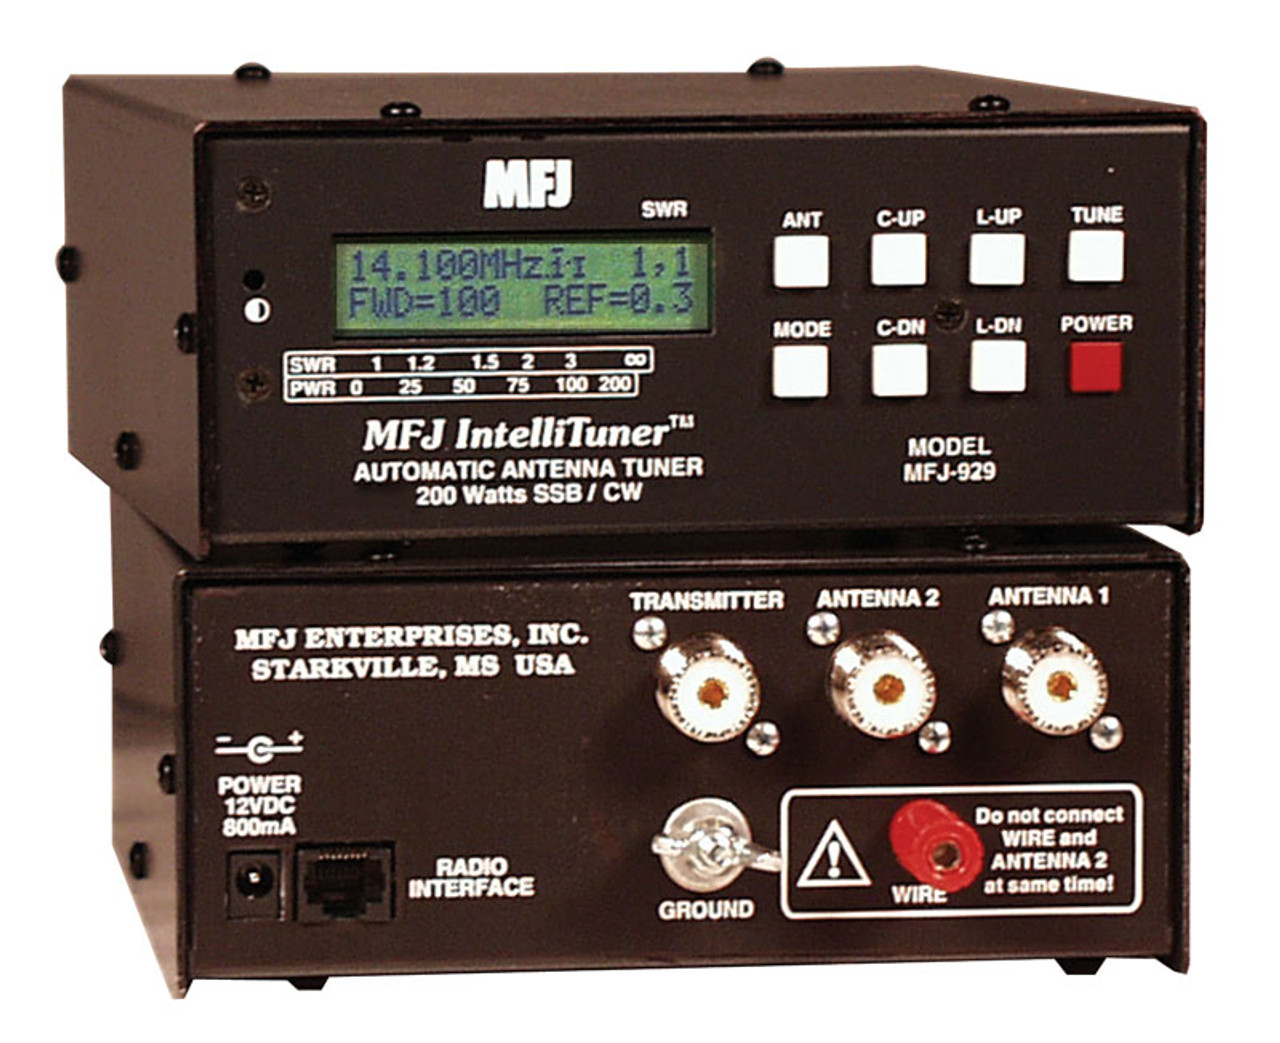 MFJ-929 Antenna Tuner, Compact, Desktop, Automatic, 200 watts, 160-10 meters, Tuner Bypass Switch